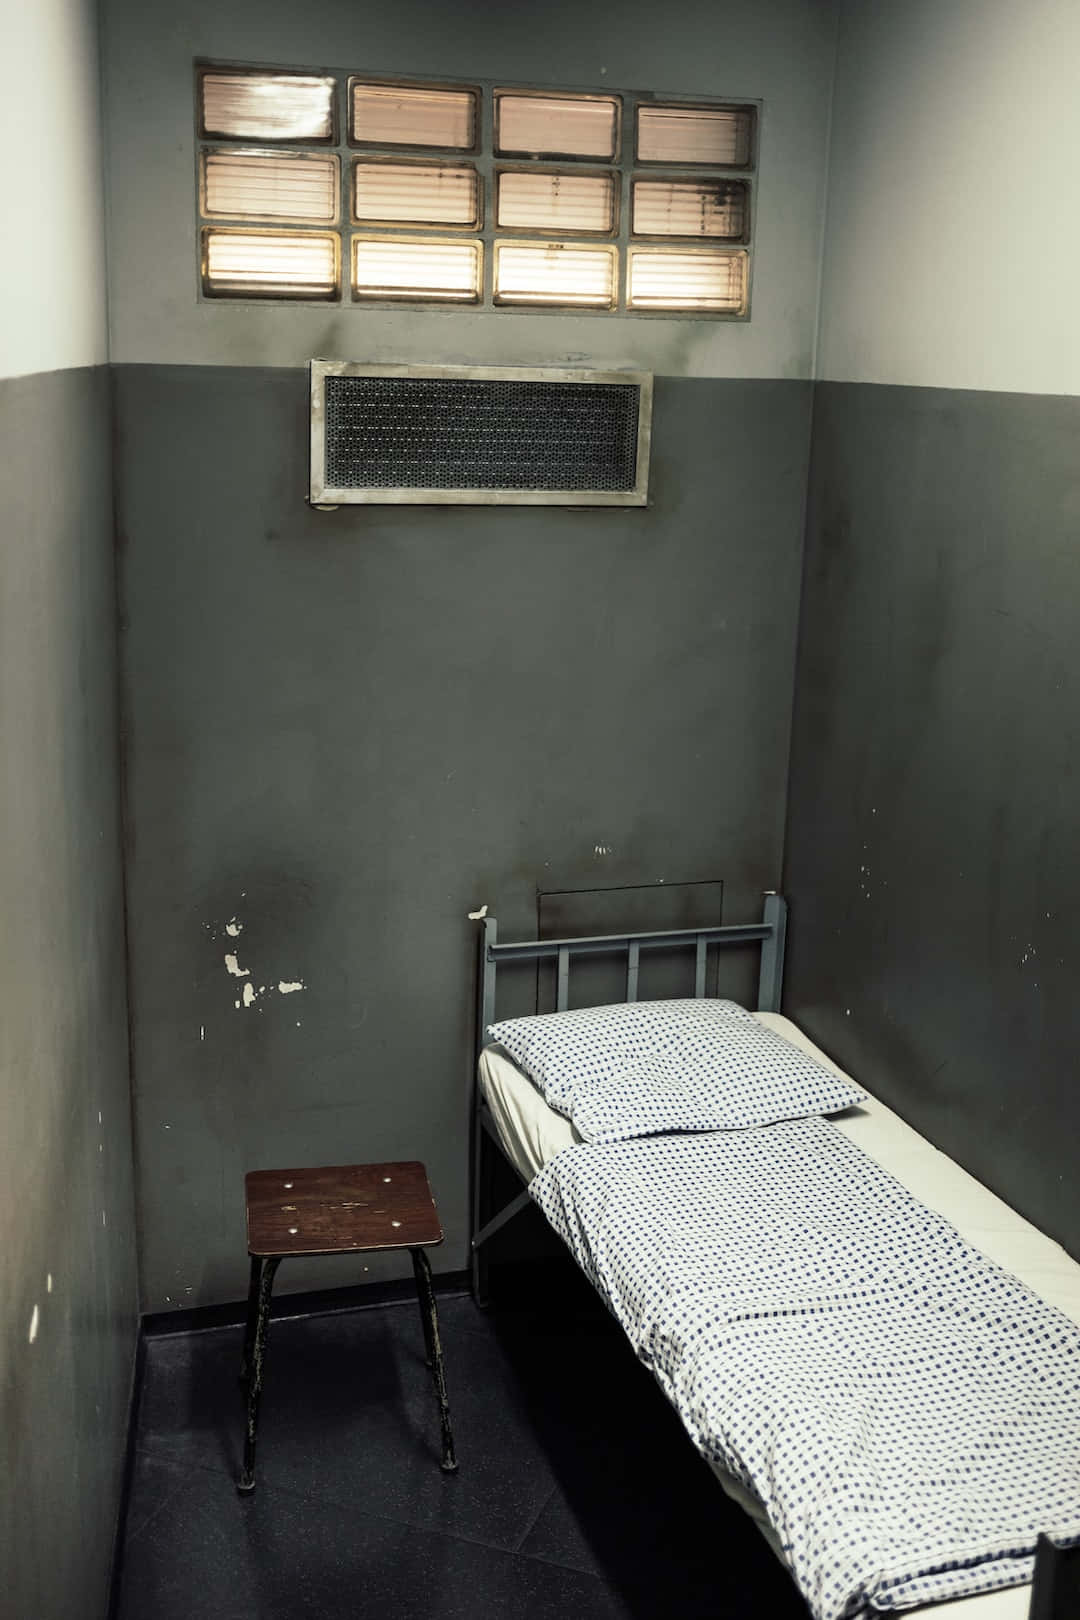 A Bed In A Cell